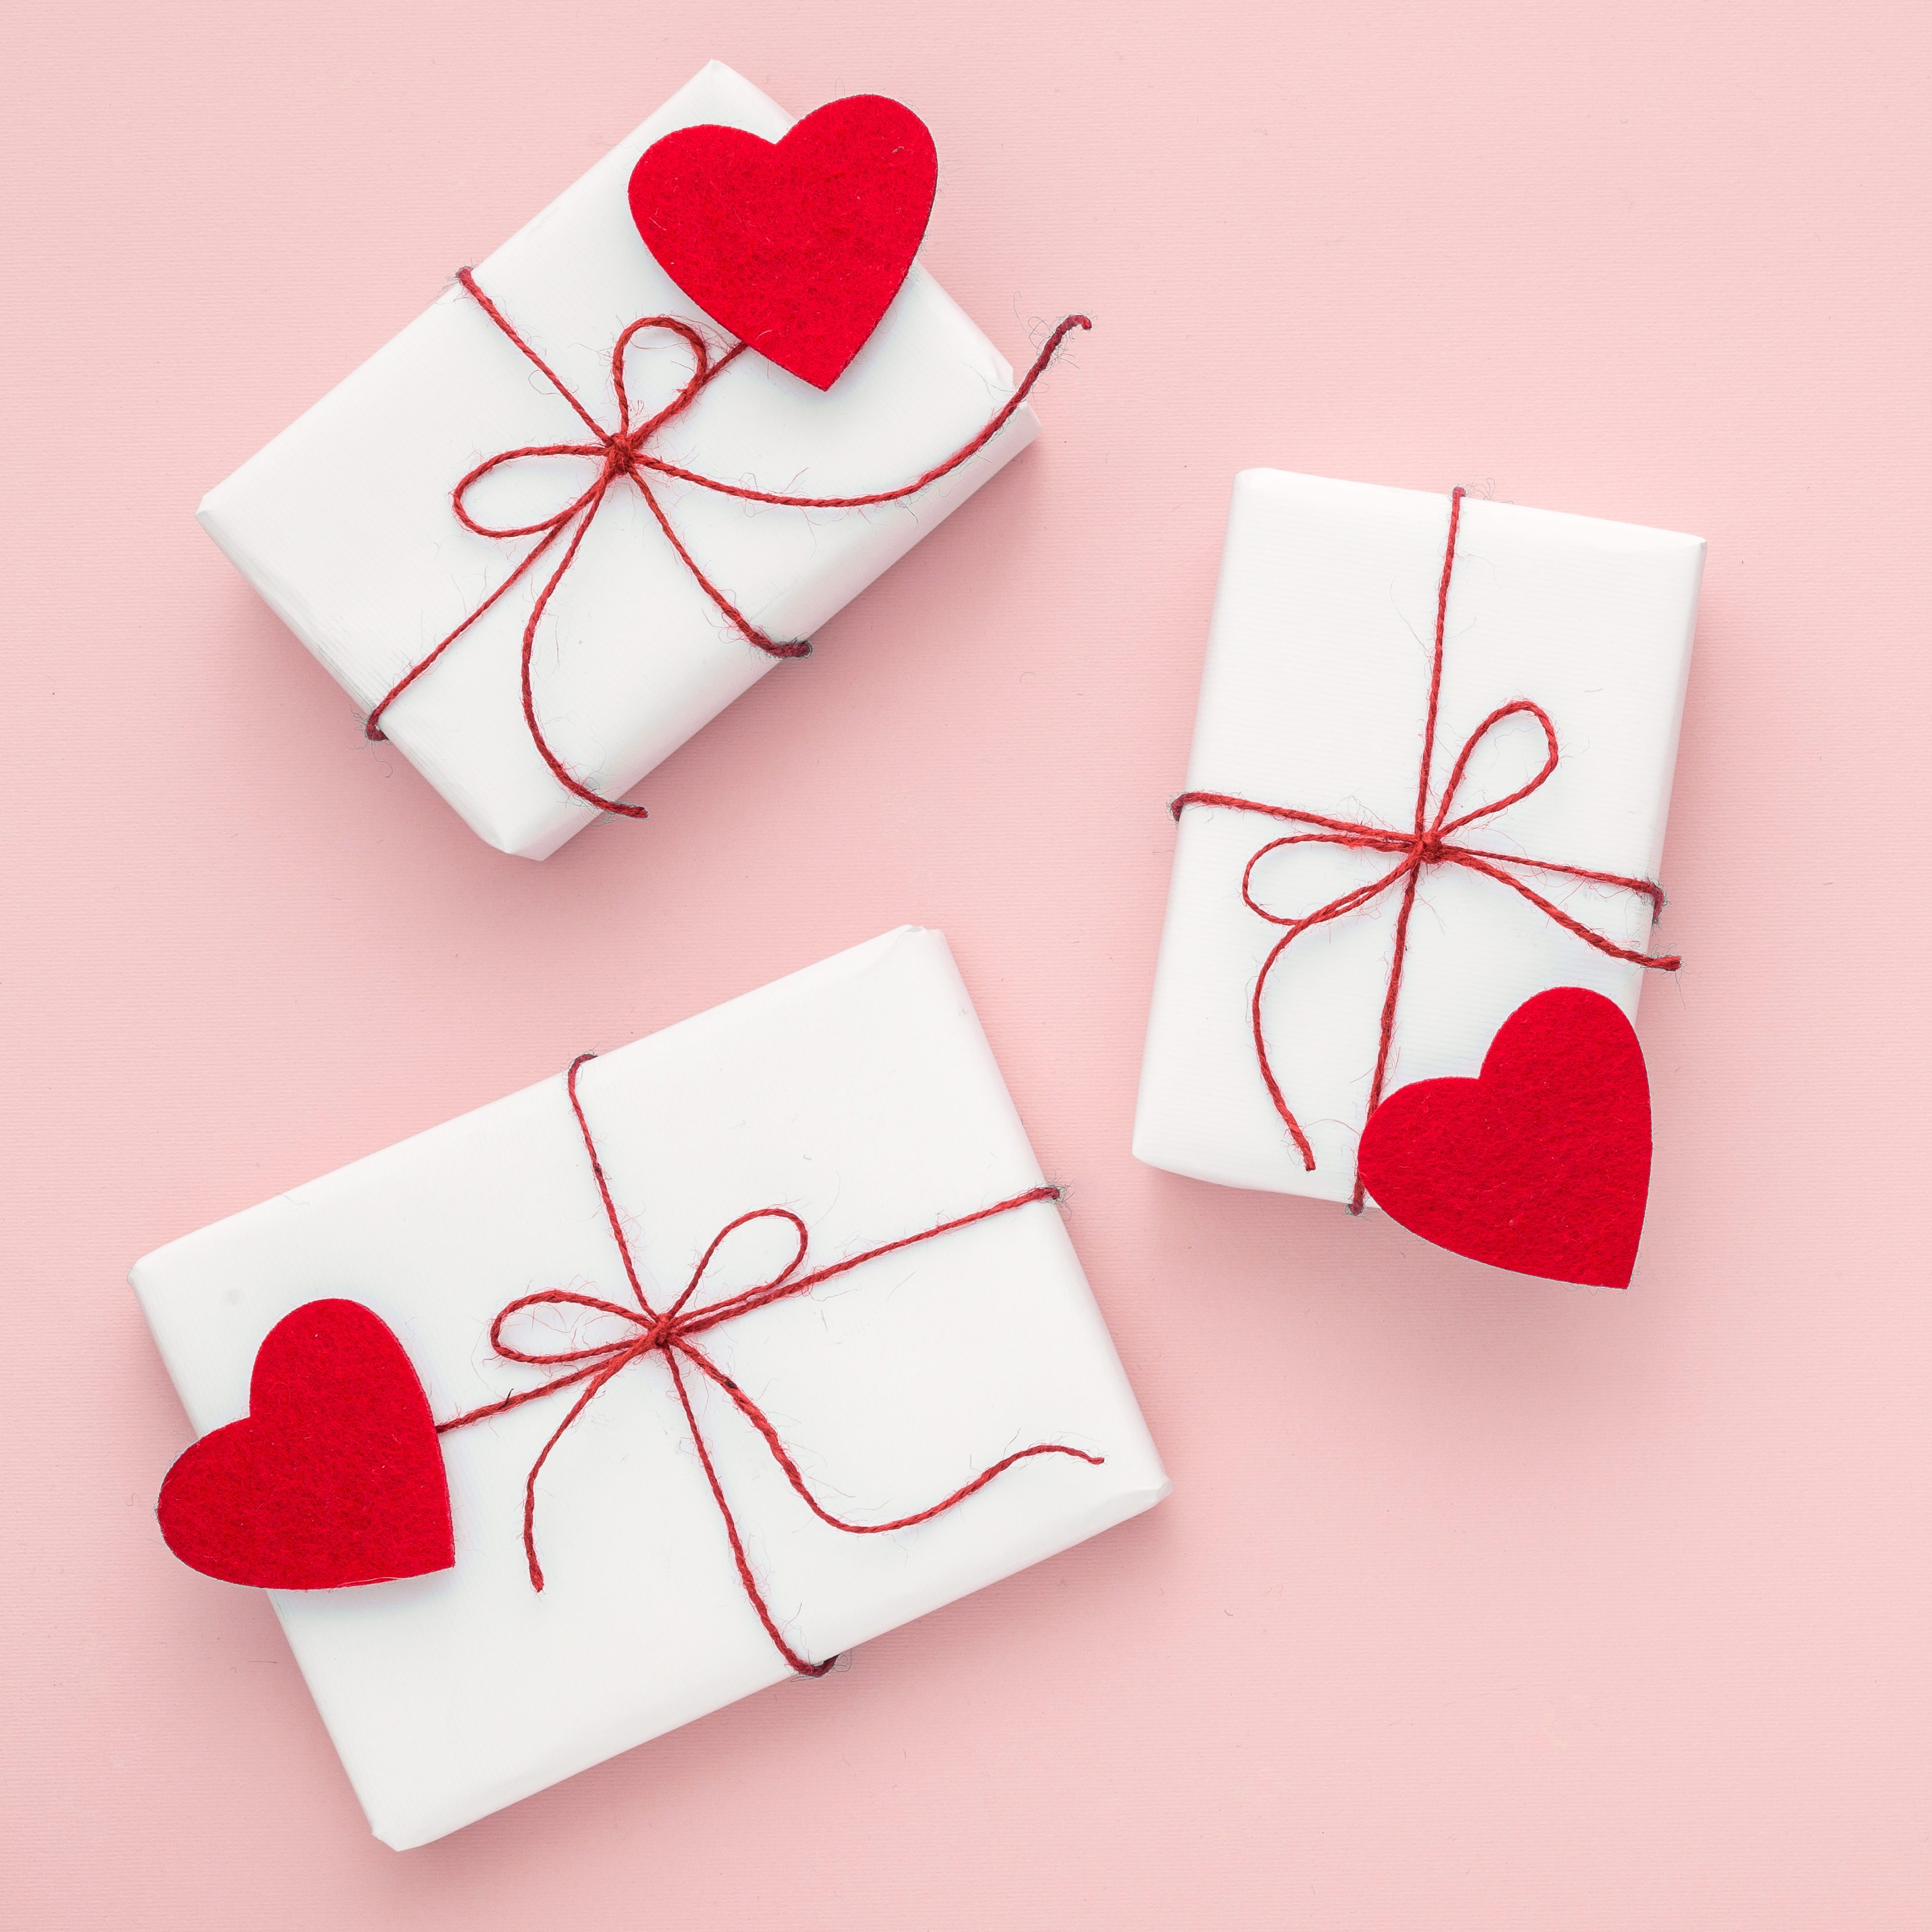 Most Popular Valentine's Day Gifts on Amazon | Reader's Digest